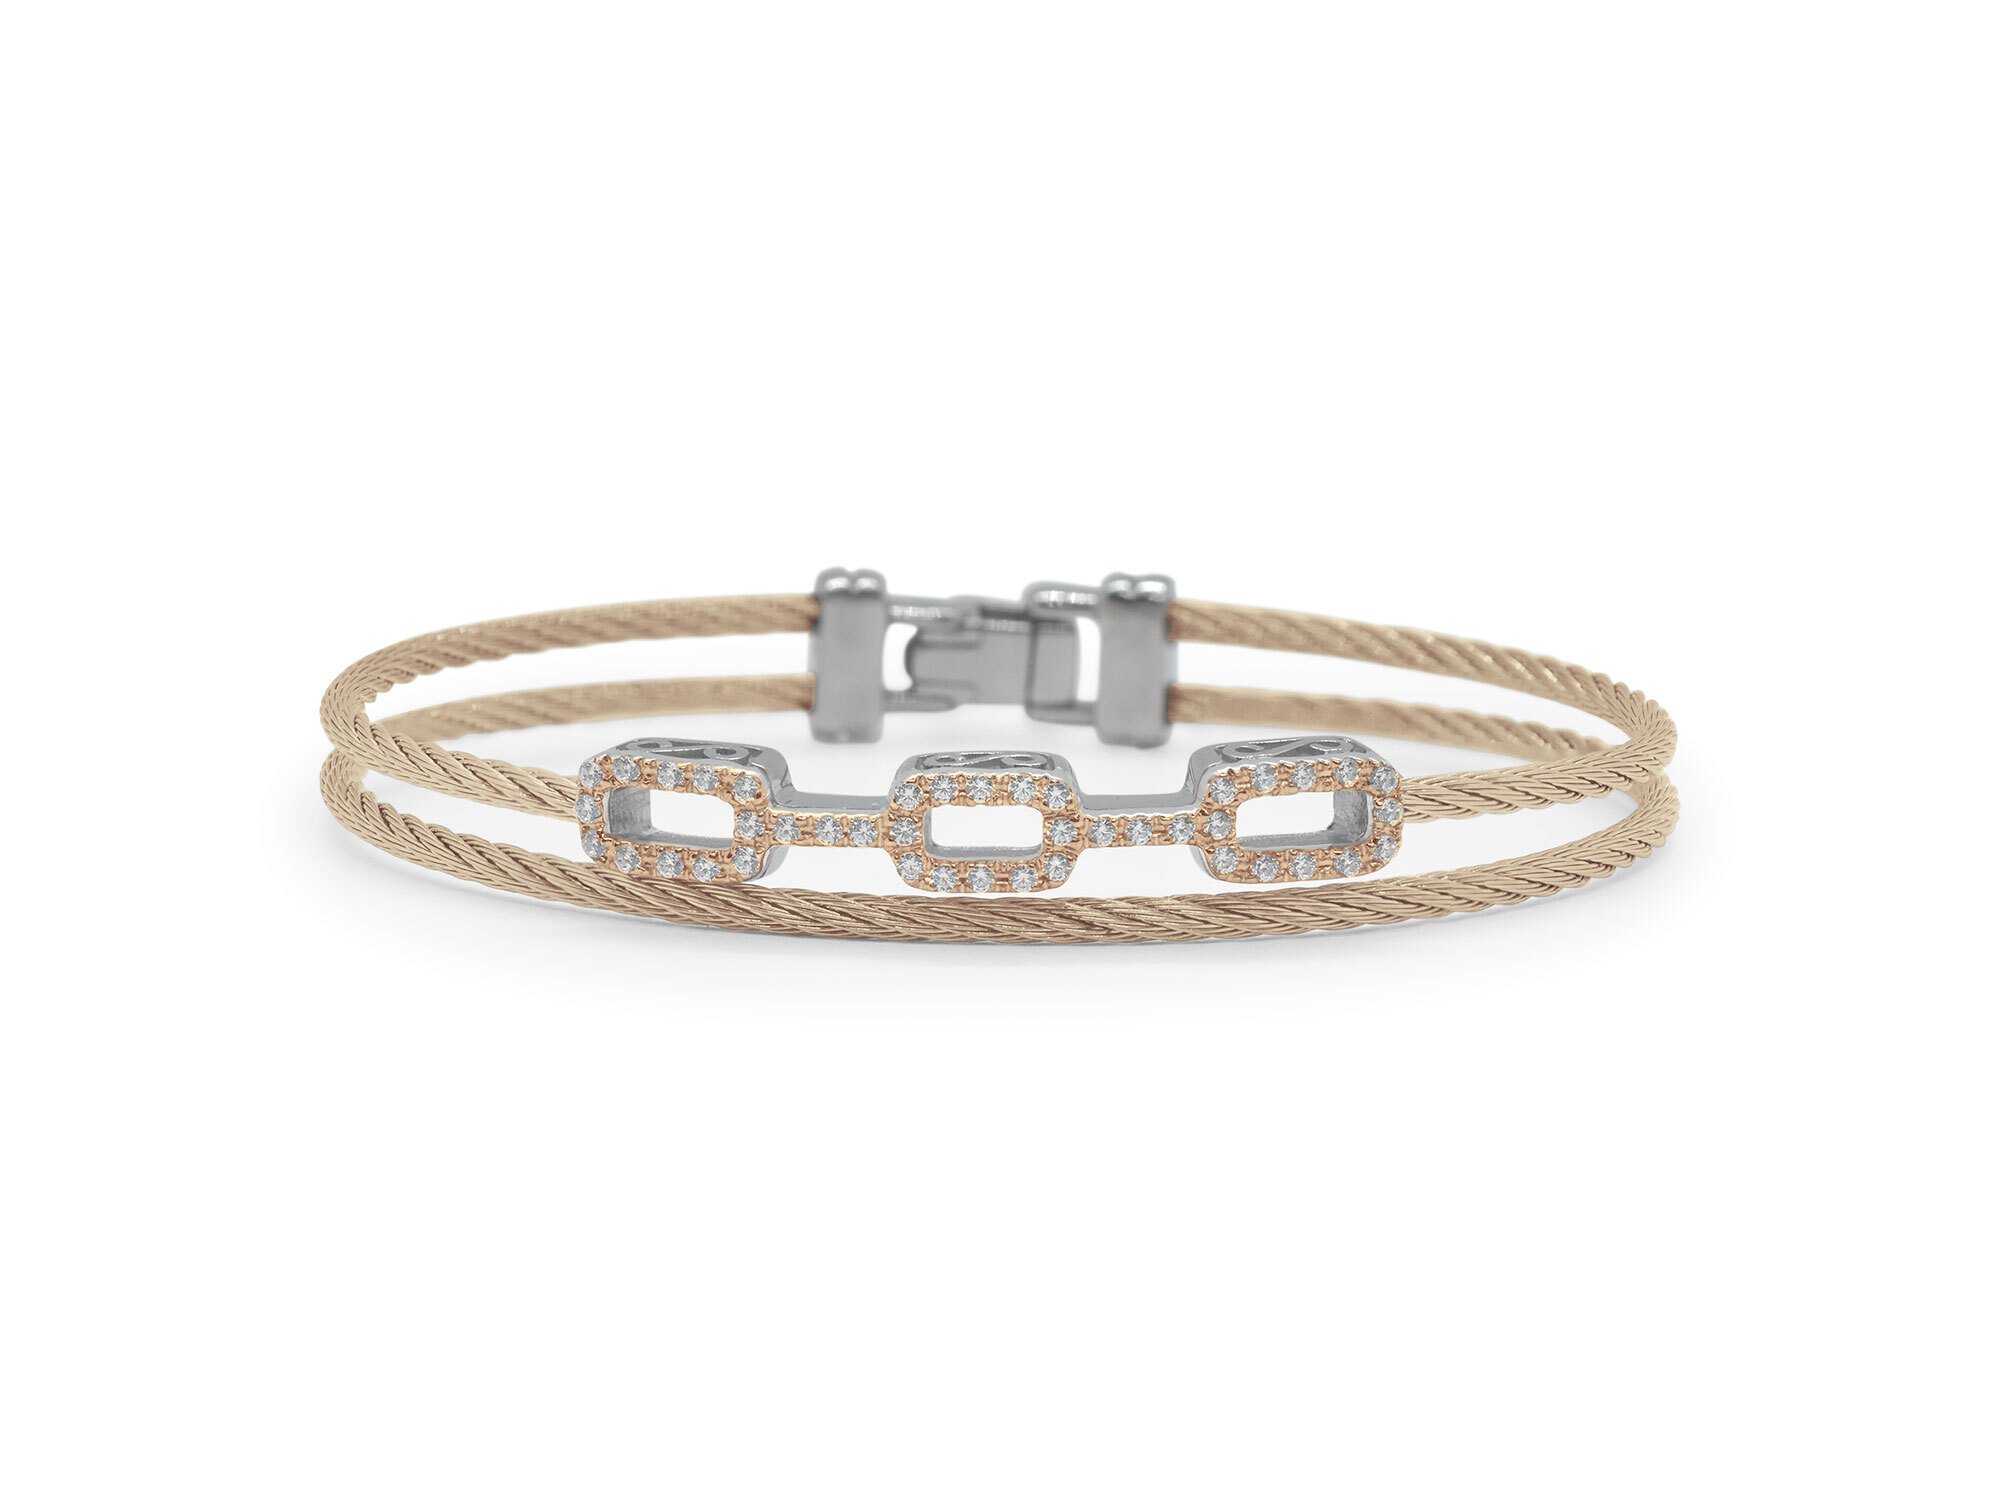 Carnation Cable Petite Layered Links Bracelet with 18kt Rose Gold & Diamonds